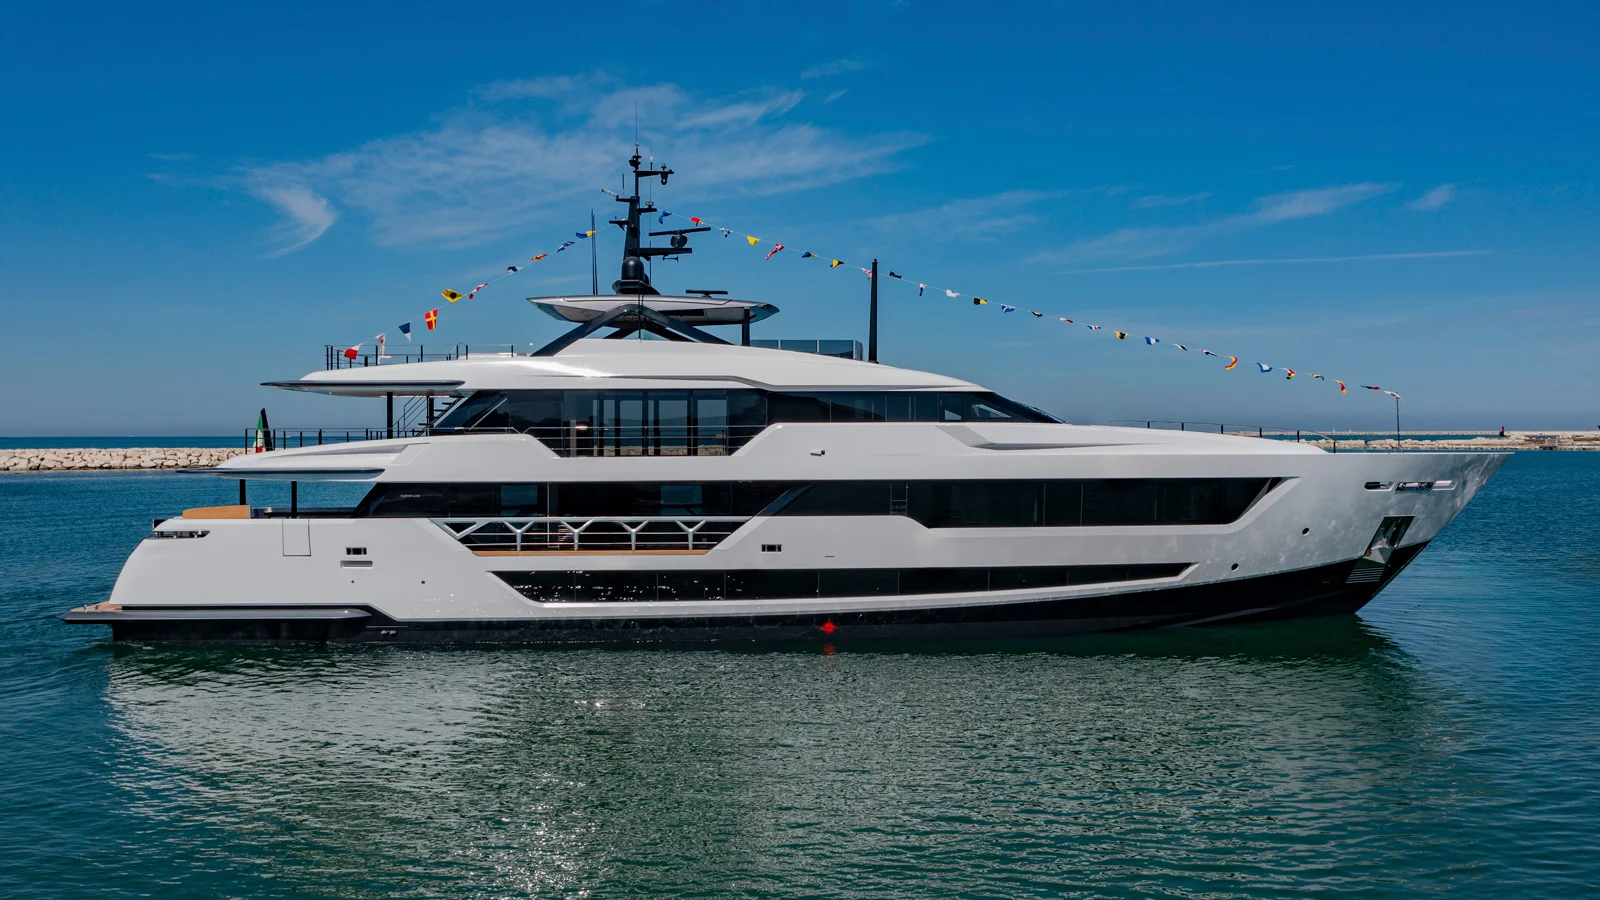 The design of the Custom Line 140 supeyacht was developed by Ferretti Group departments